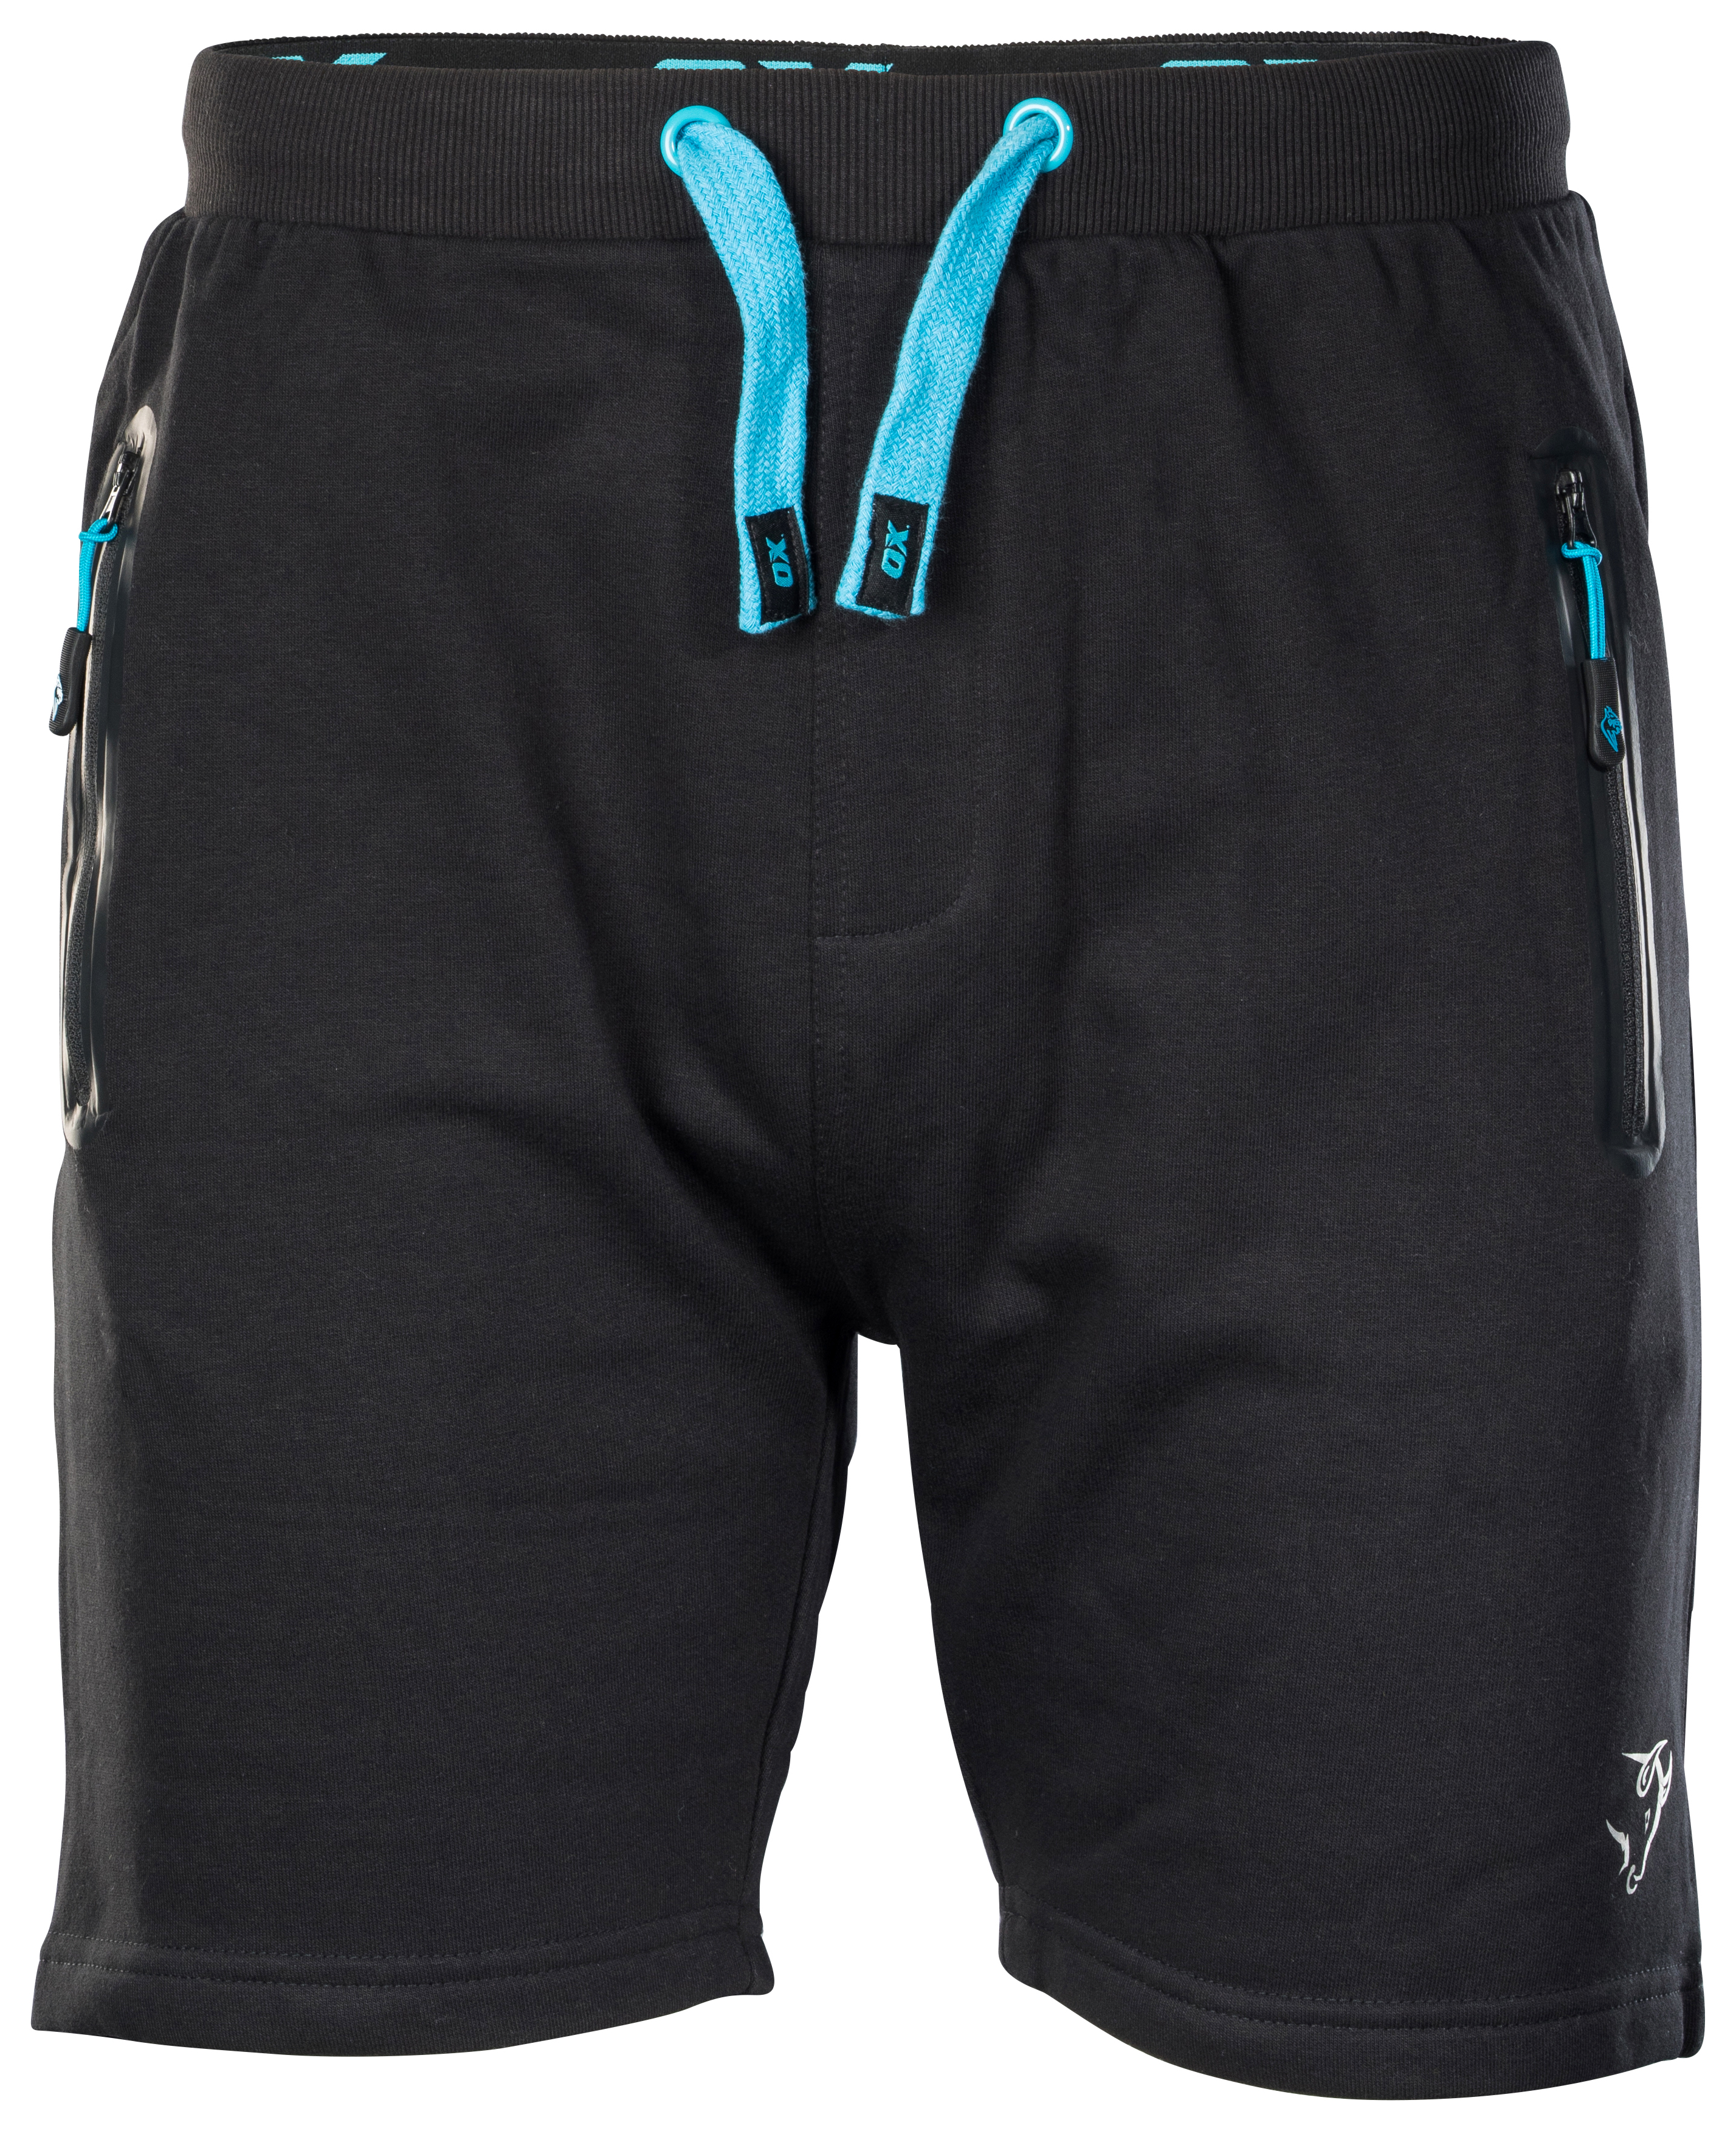 Image of OX OX-W553236 Black Jogger Shorts - 36W